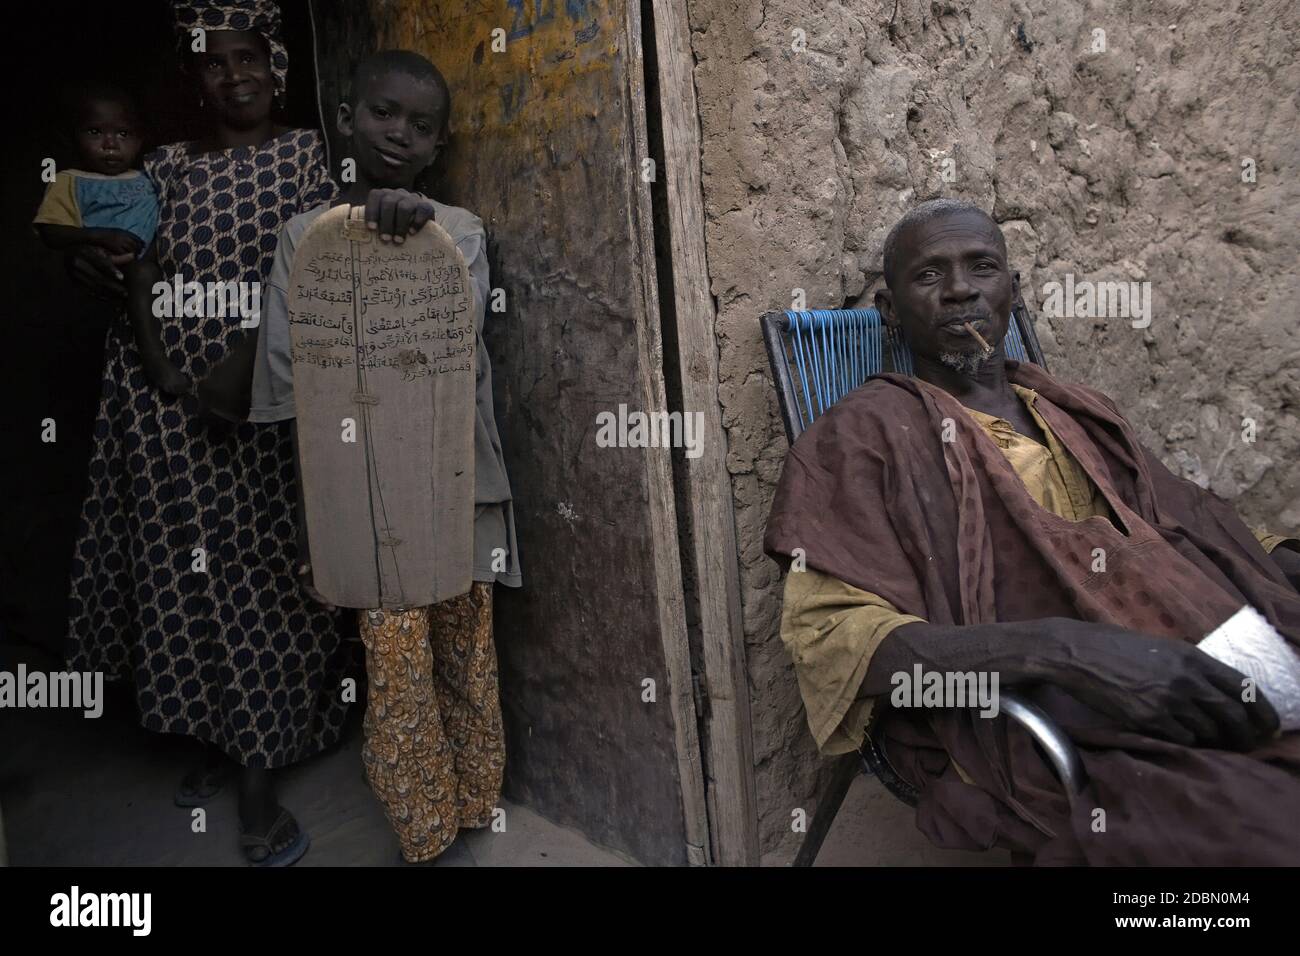 The family sends their son to the koranic school  in Timbuktu,Mali, Africa Stock Photo